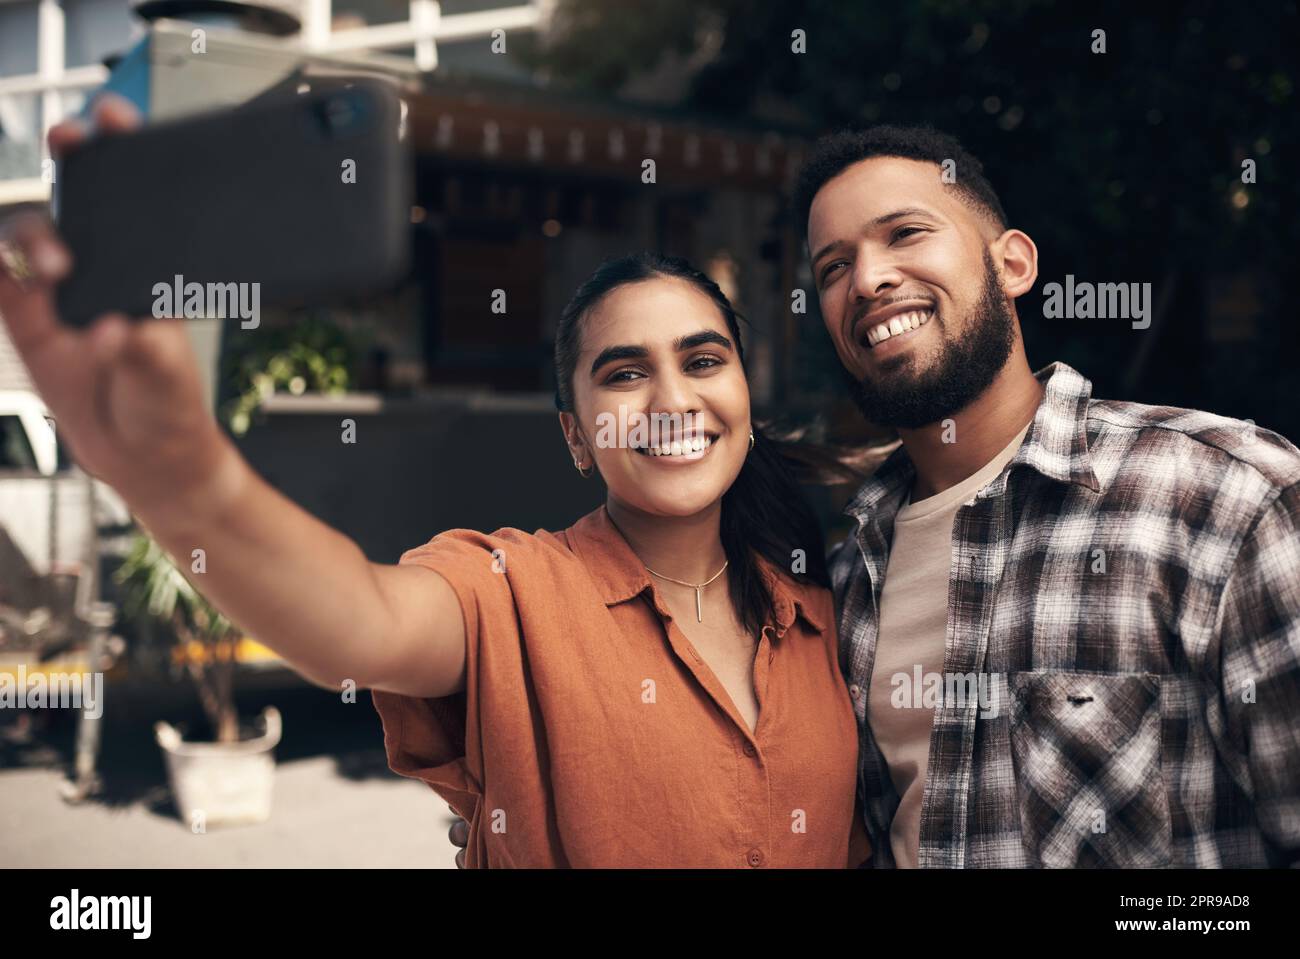 Some much needed bonding time. two young friends standing outside a restaurant and using a cellphone to take a selfie. Stock Photo